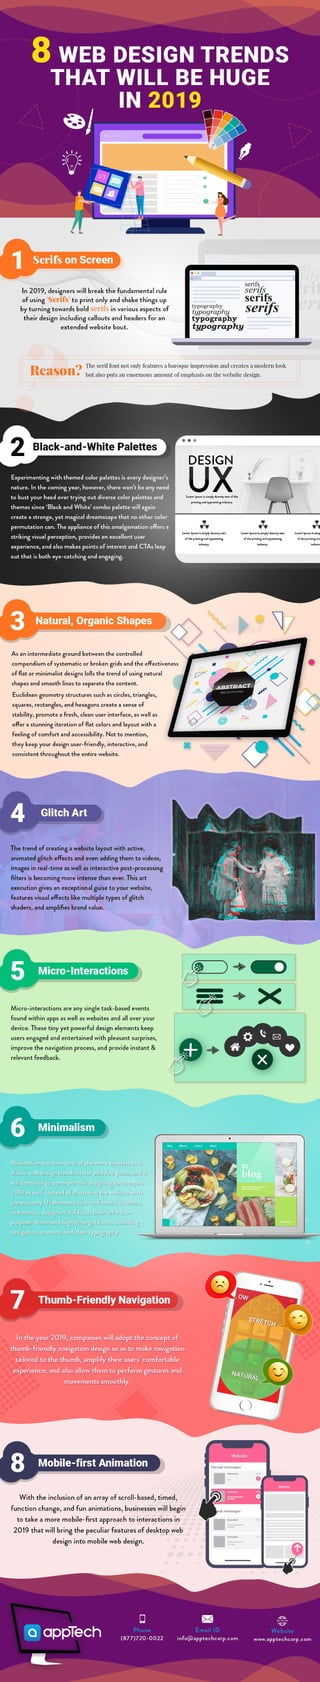 8 Web Design Trends that will be Huge in 2019 - Infographic